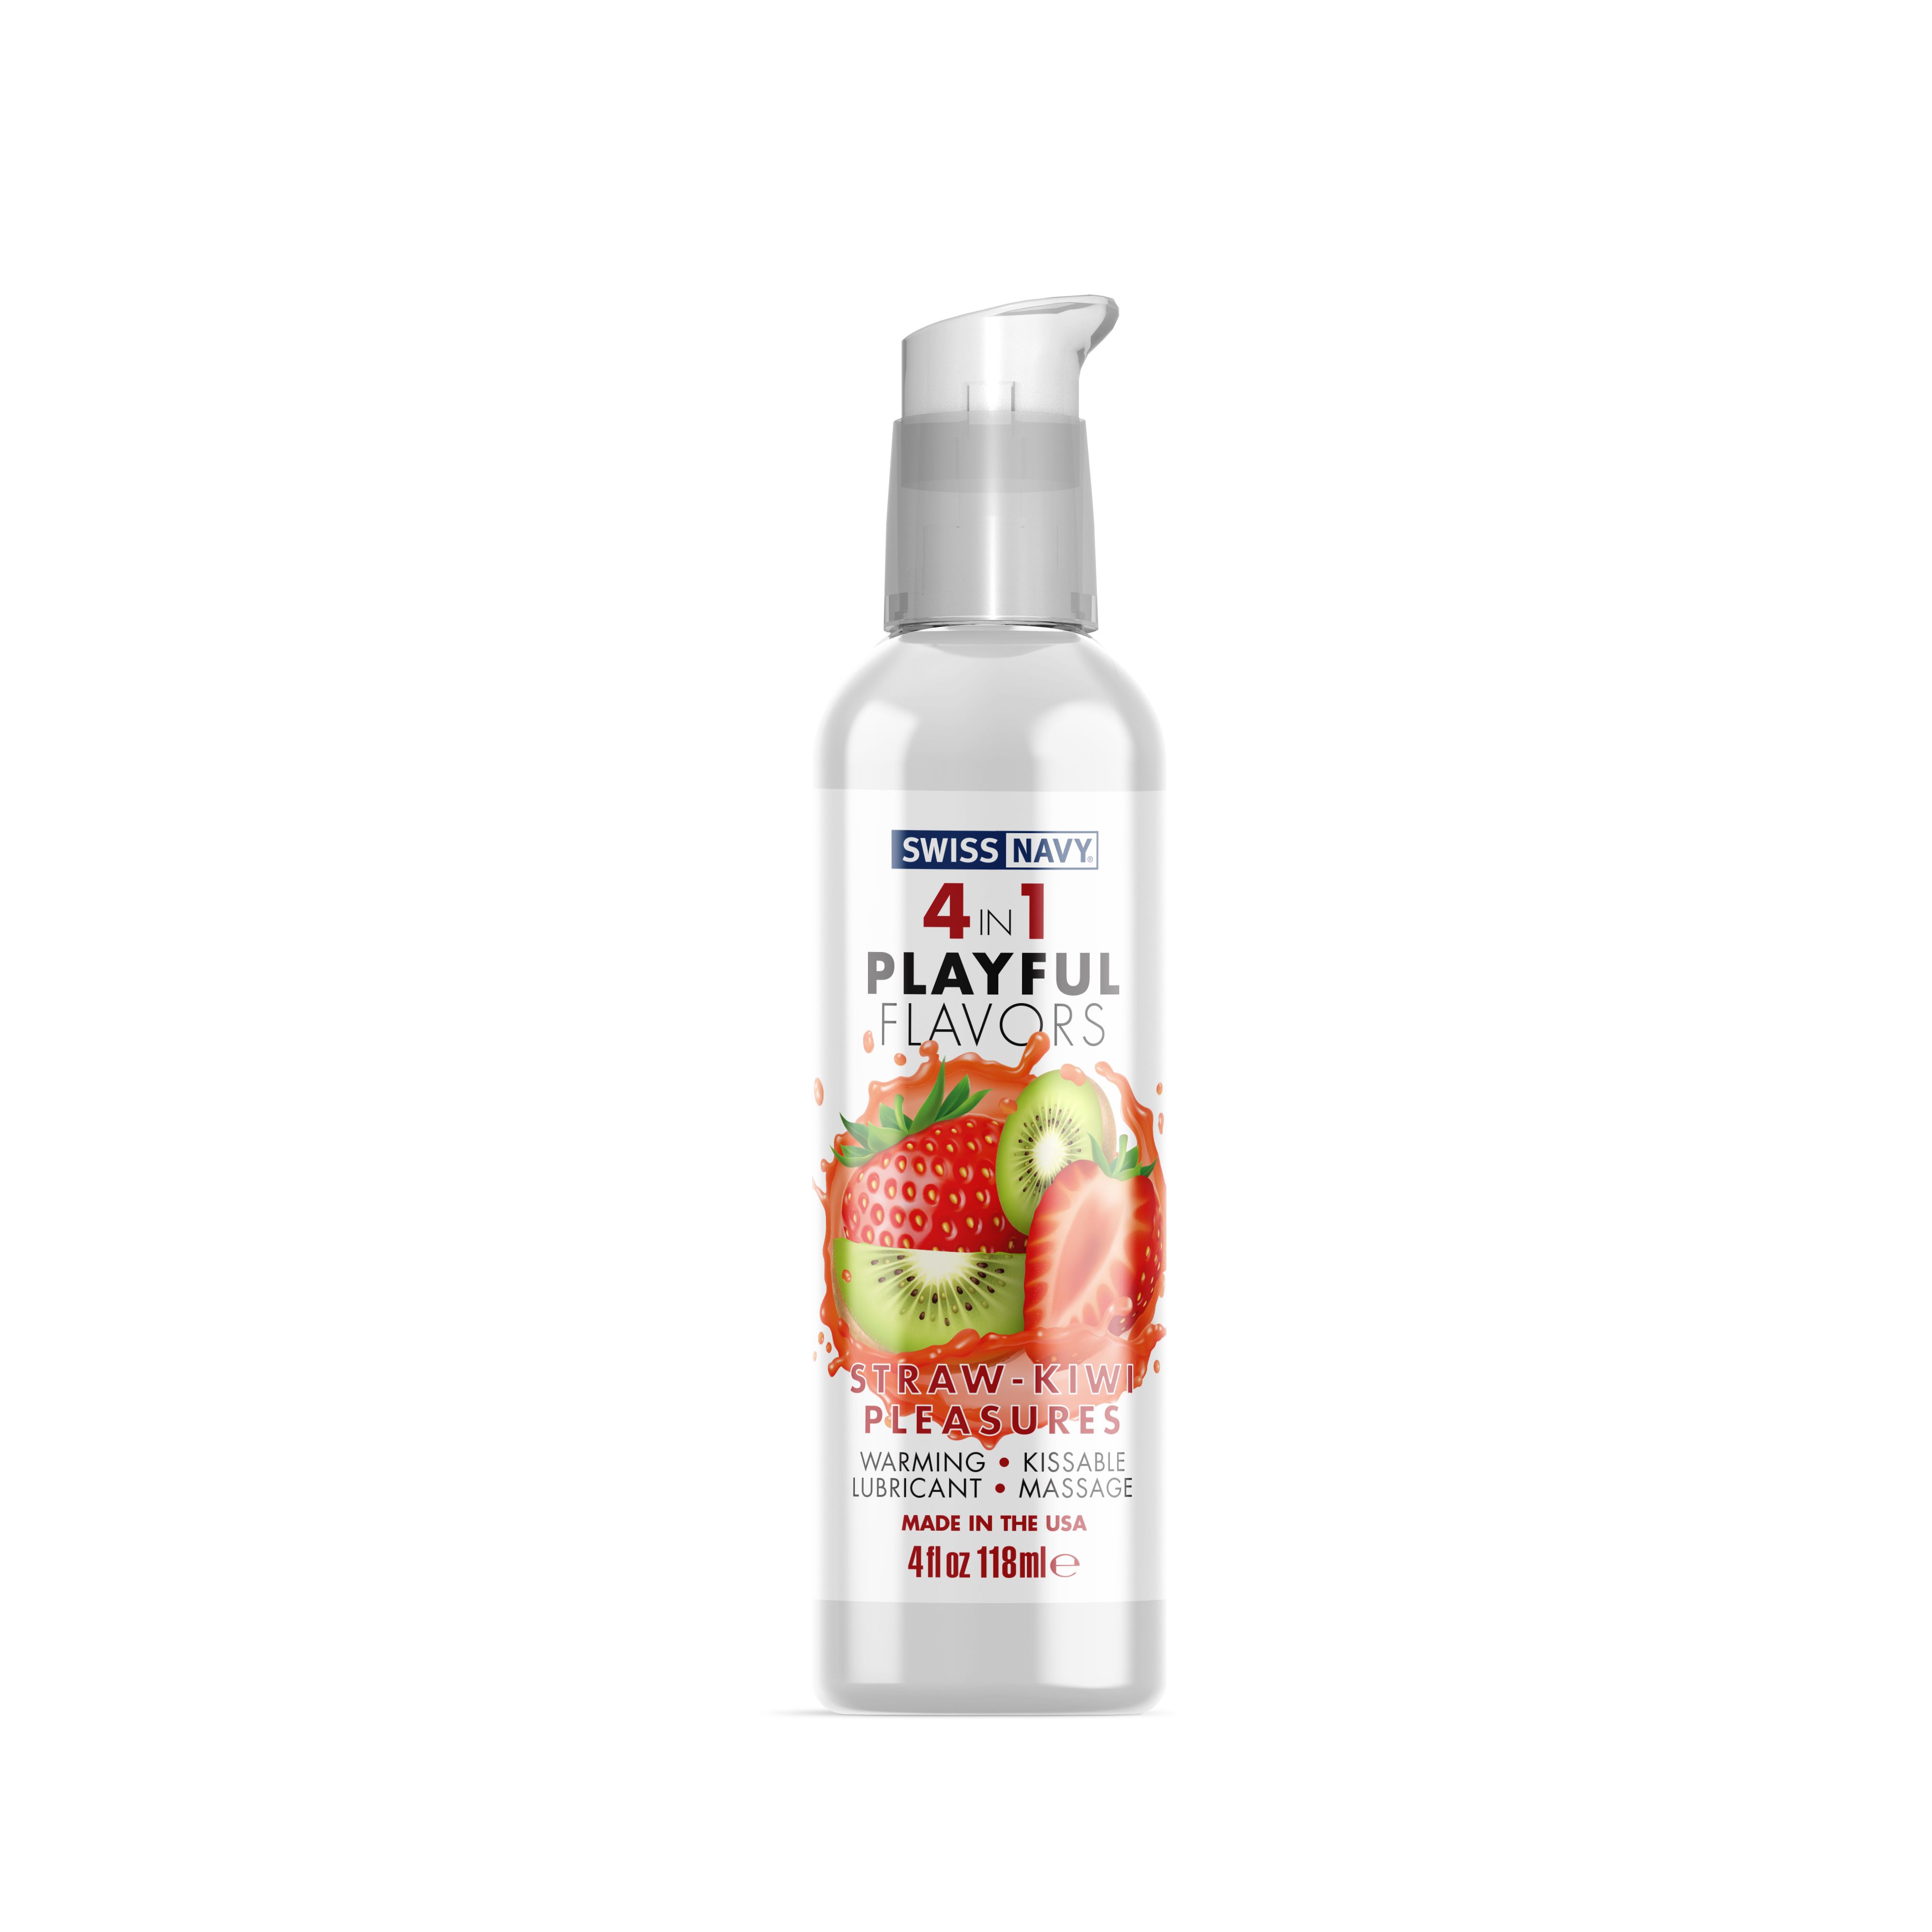 SWISS NAVY 4 IN 1 PLAYFUL FLAVORS STRAWBERRY KIWI PLEASURE 4OZ - Click Image to Close